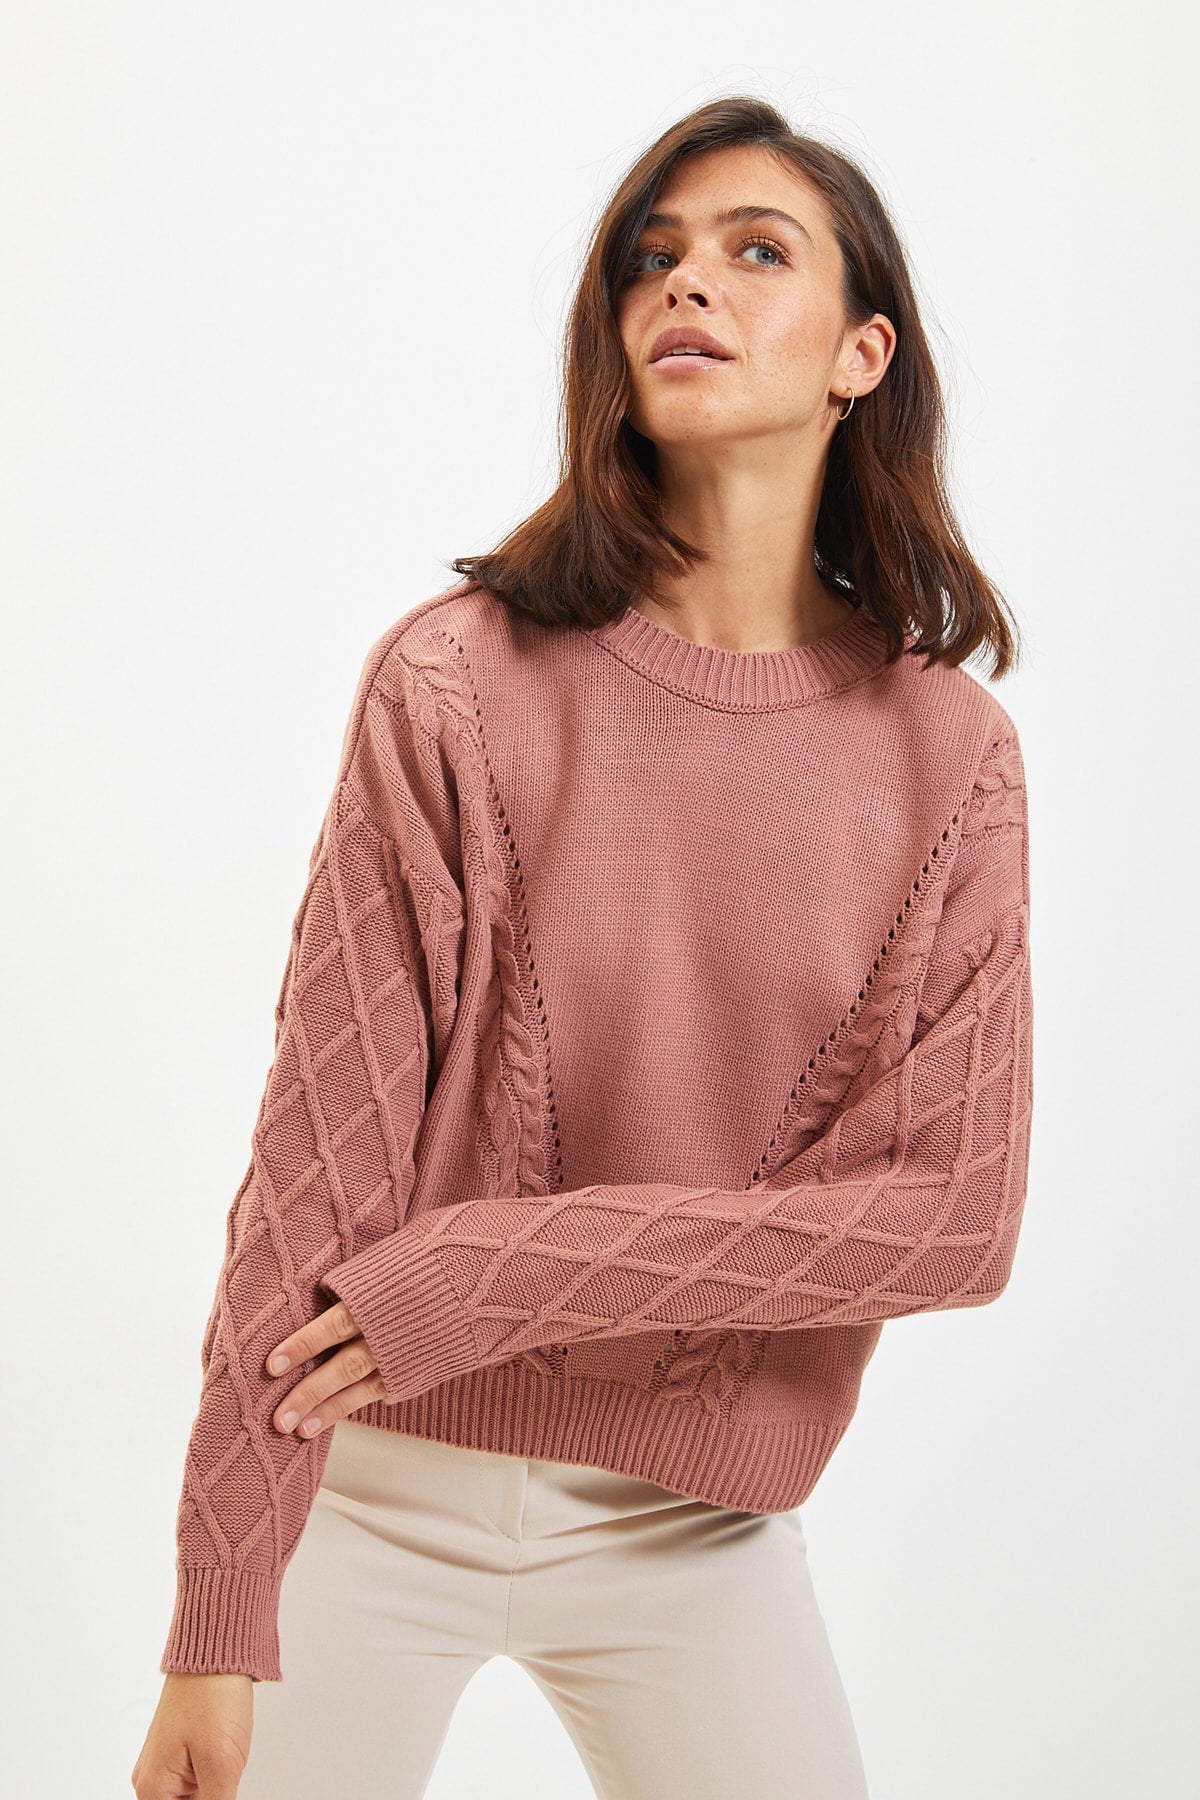 Round Neck Woven Knitted Sweater in Cream, Rose and Mint